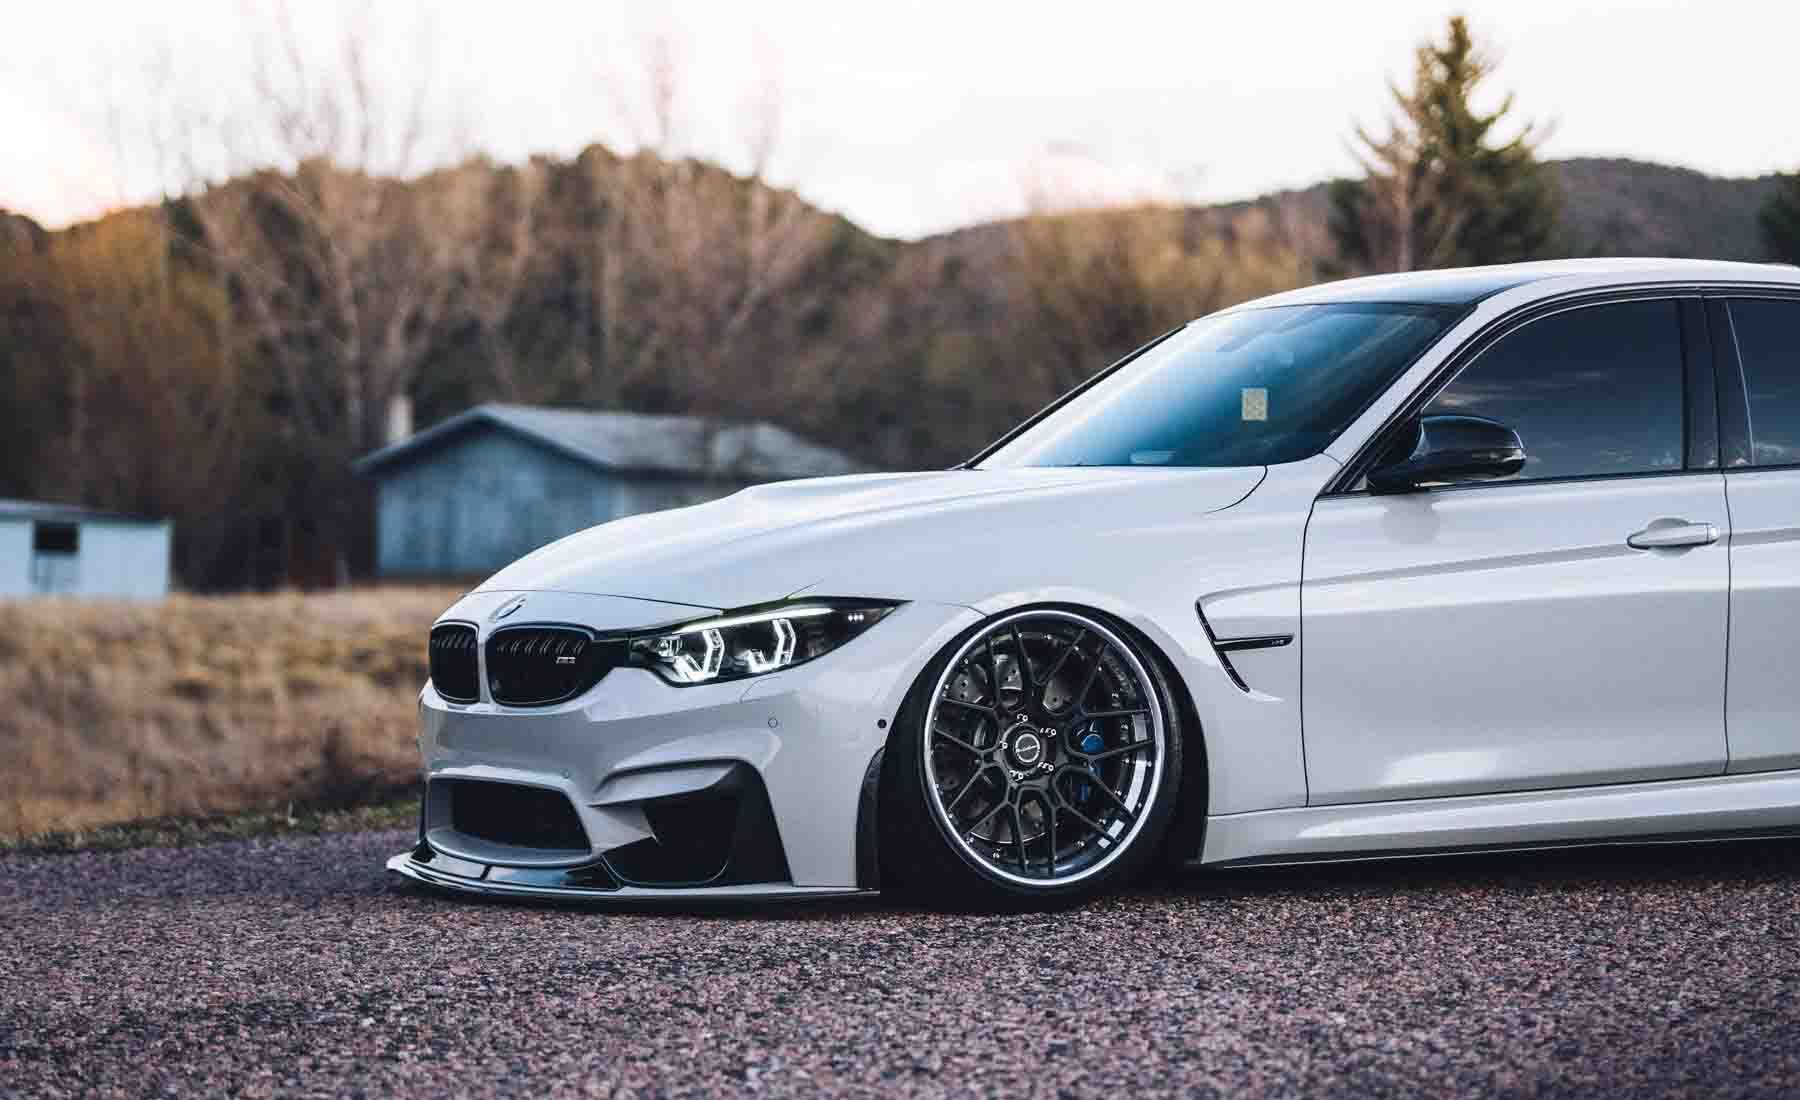 images-products-1-2649-232974937-fashion-grey-bmw-f80-m3-brixton-forged-cm8-targa-series-3-piece-concave-forged-wheels-20-brushed.jpg